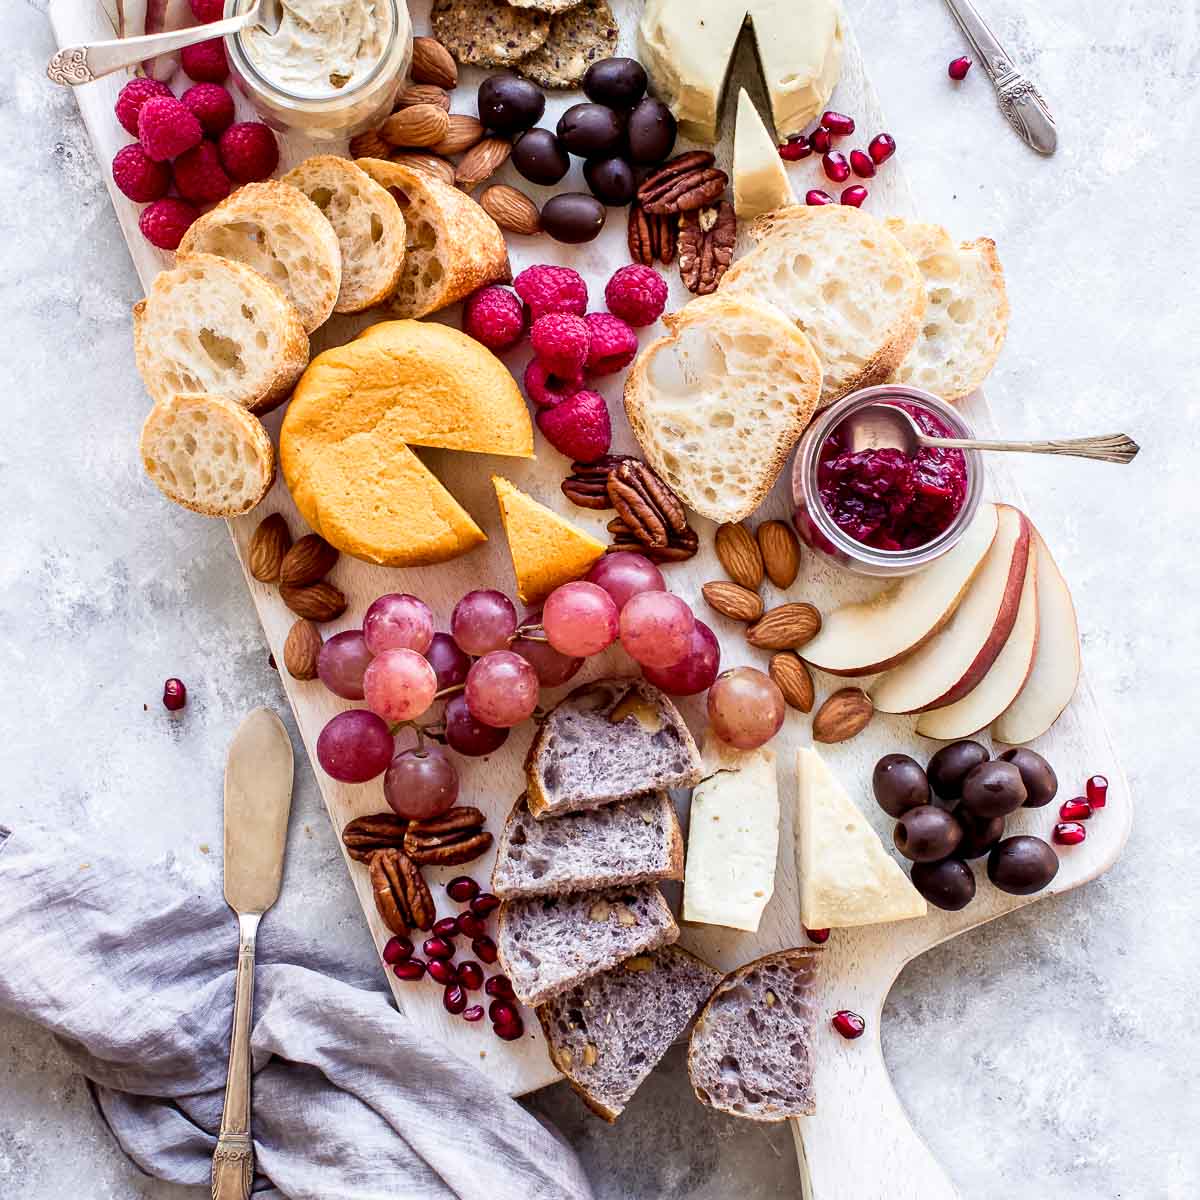 Vegan cheese board featuring cheeses, fruit and bread.